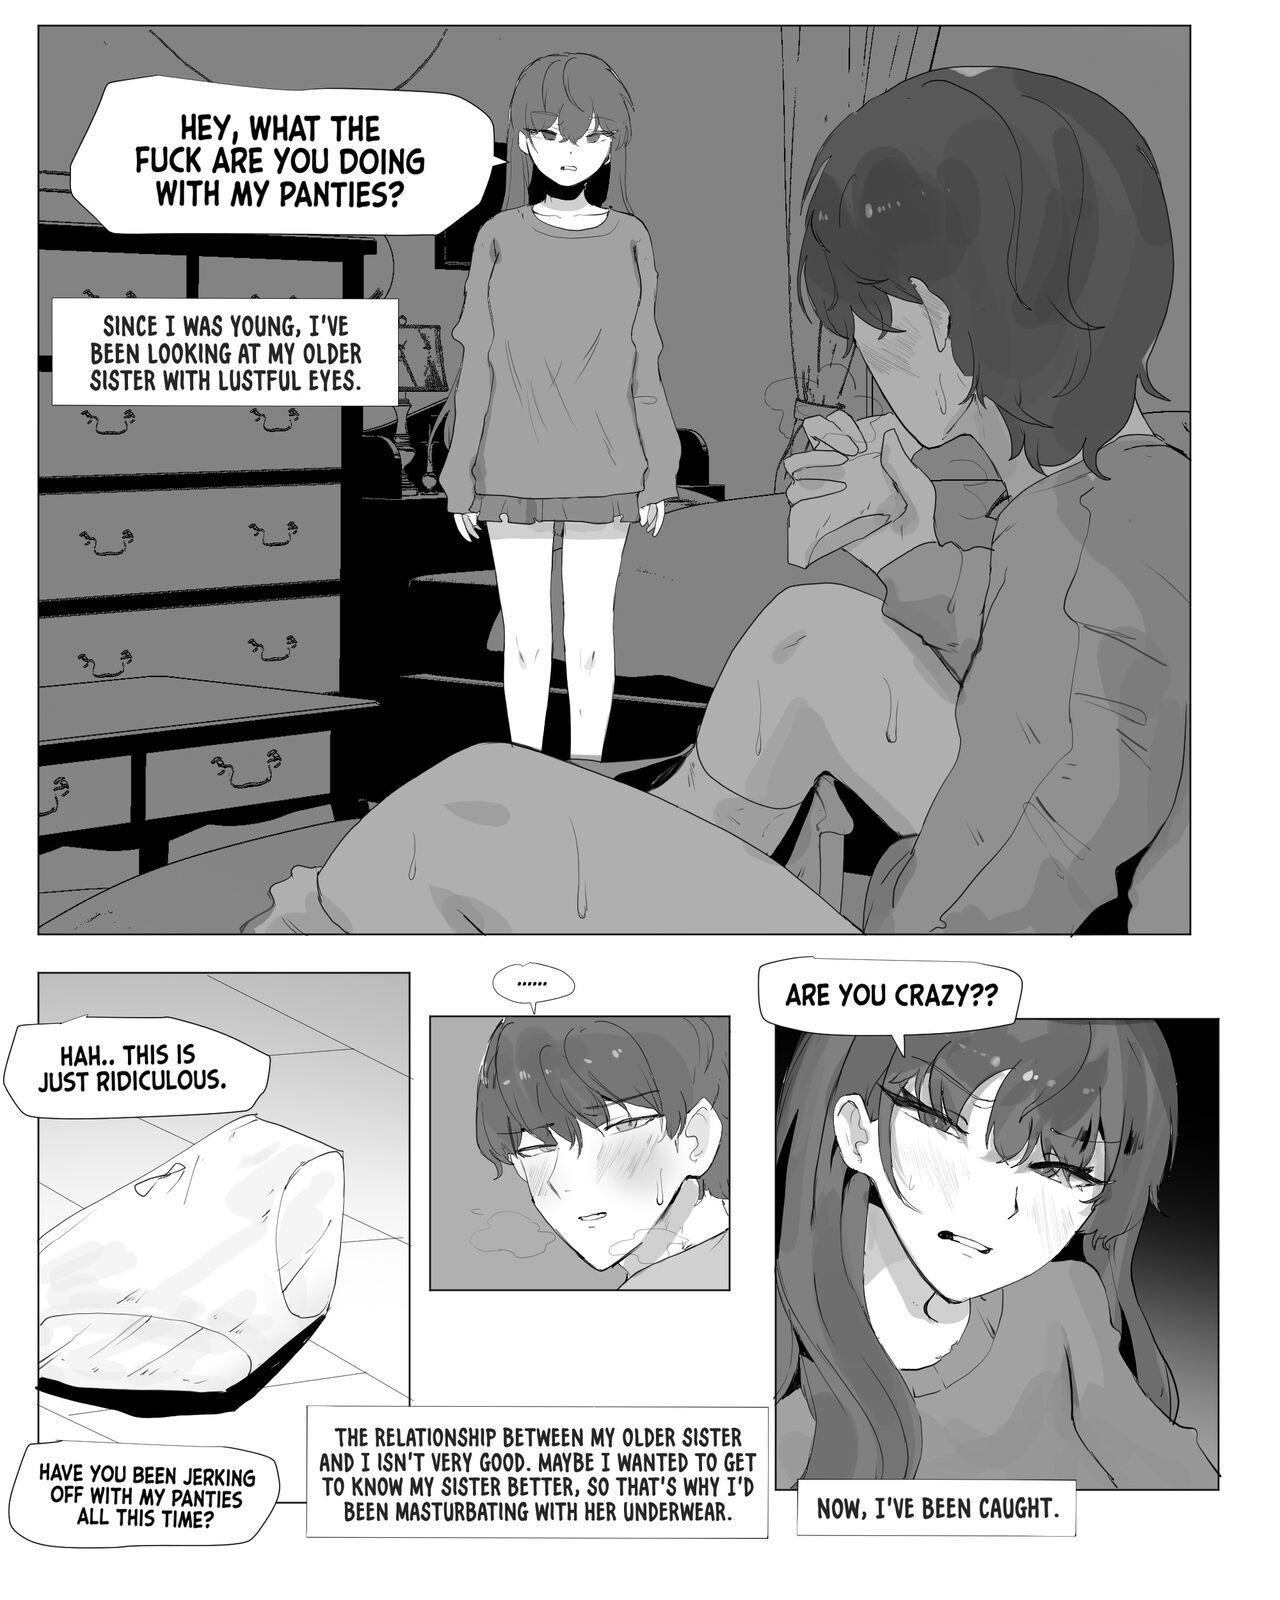 Ladyboy A Story About Getting Trained By My Older Sister - Original Brazil - Page 2